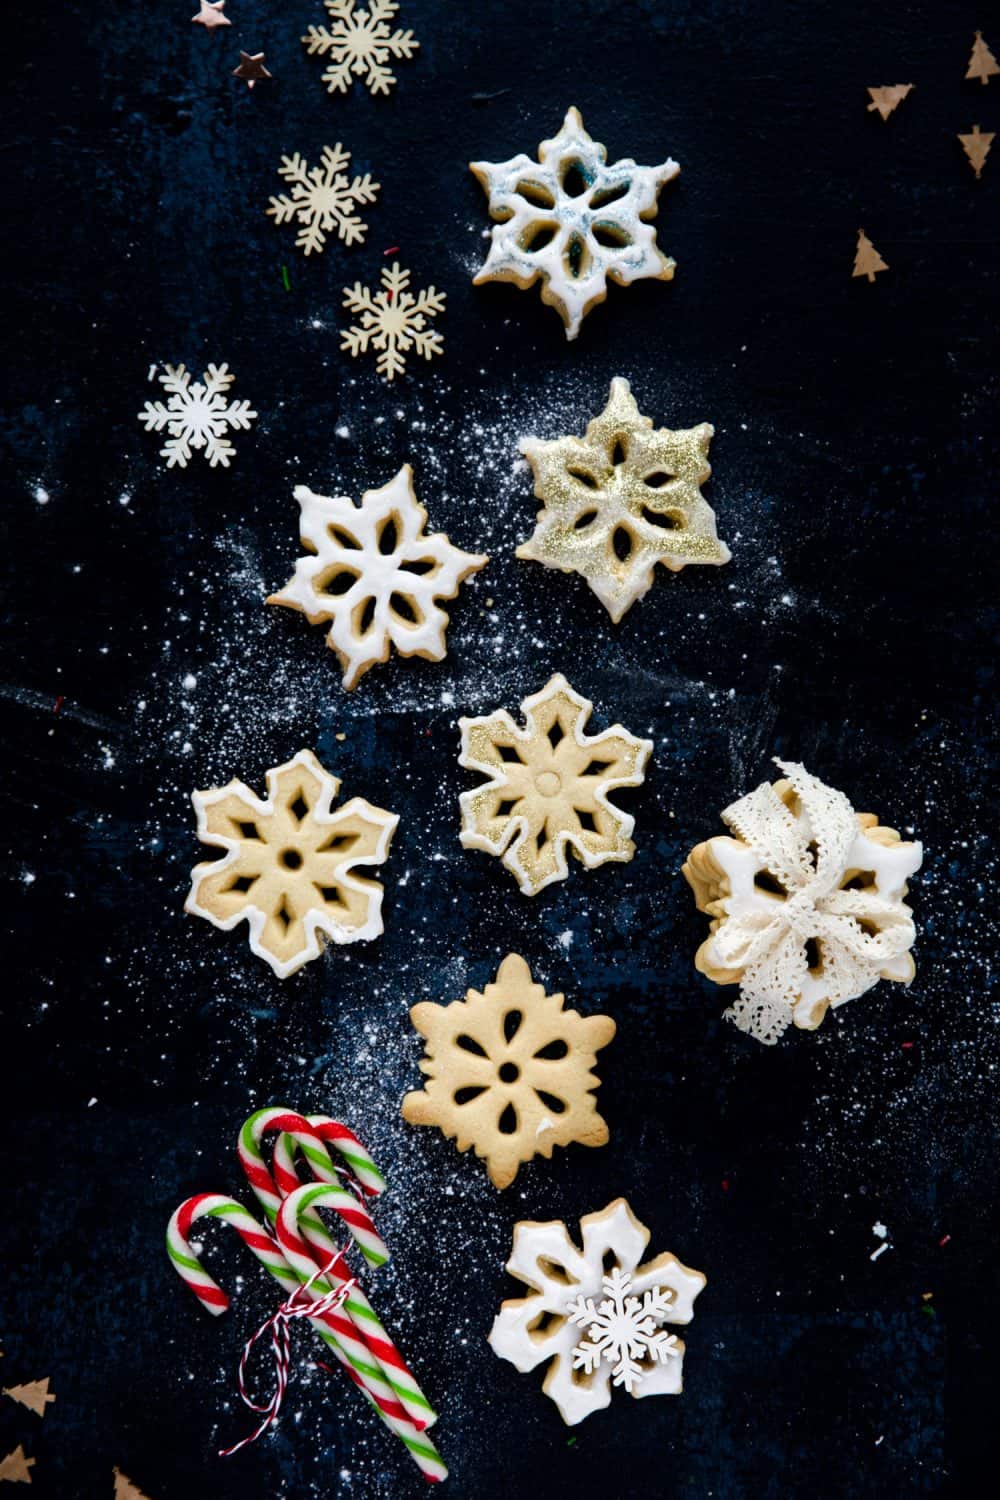 Overhead view of 7 snowflake biscuits on a dark blue background. There is a stack of biscuits to the right and at the bottom of the image a bundle of candy canes. 